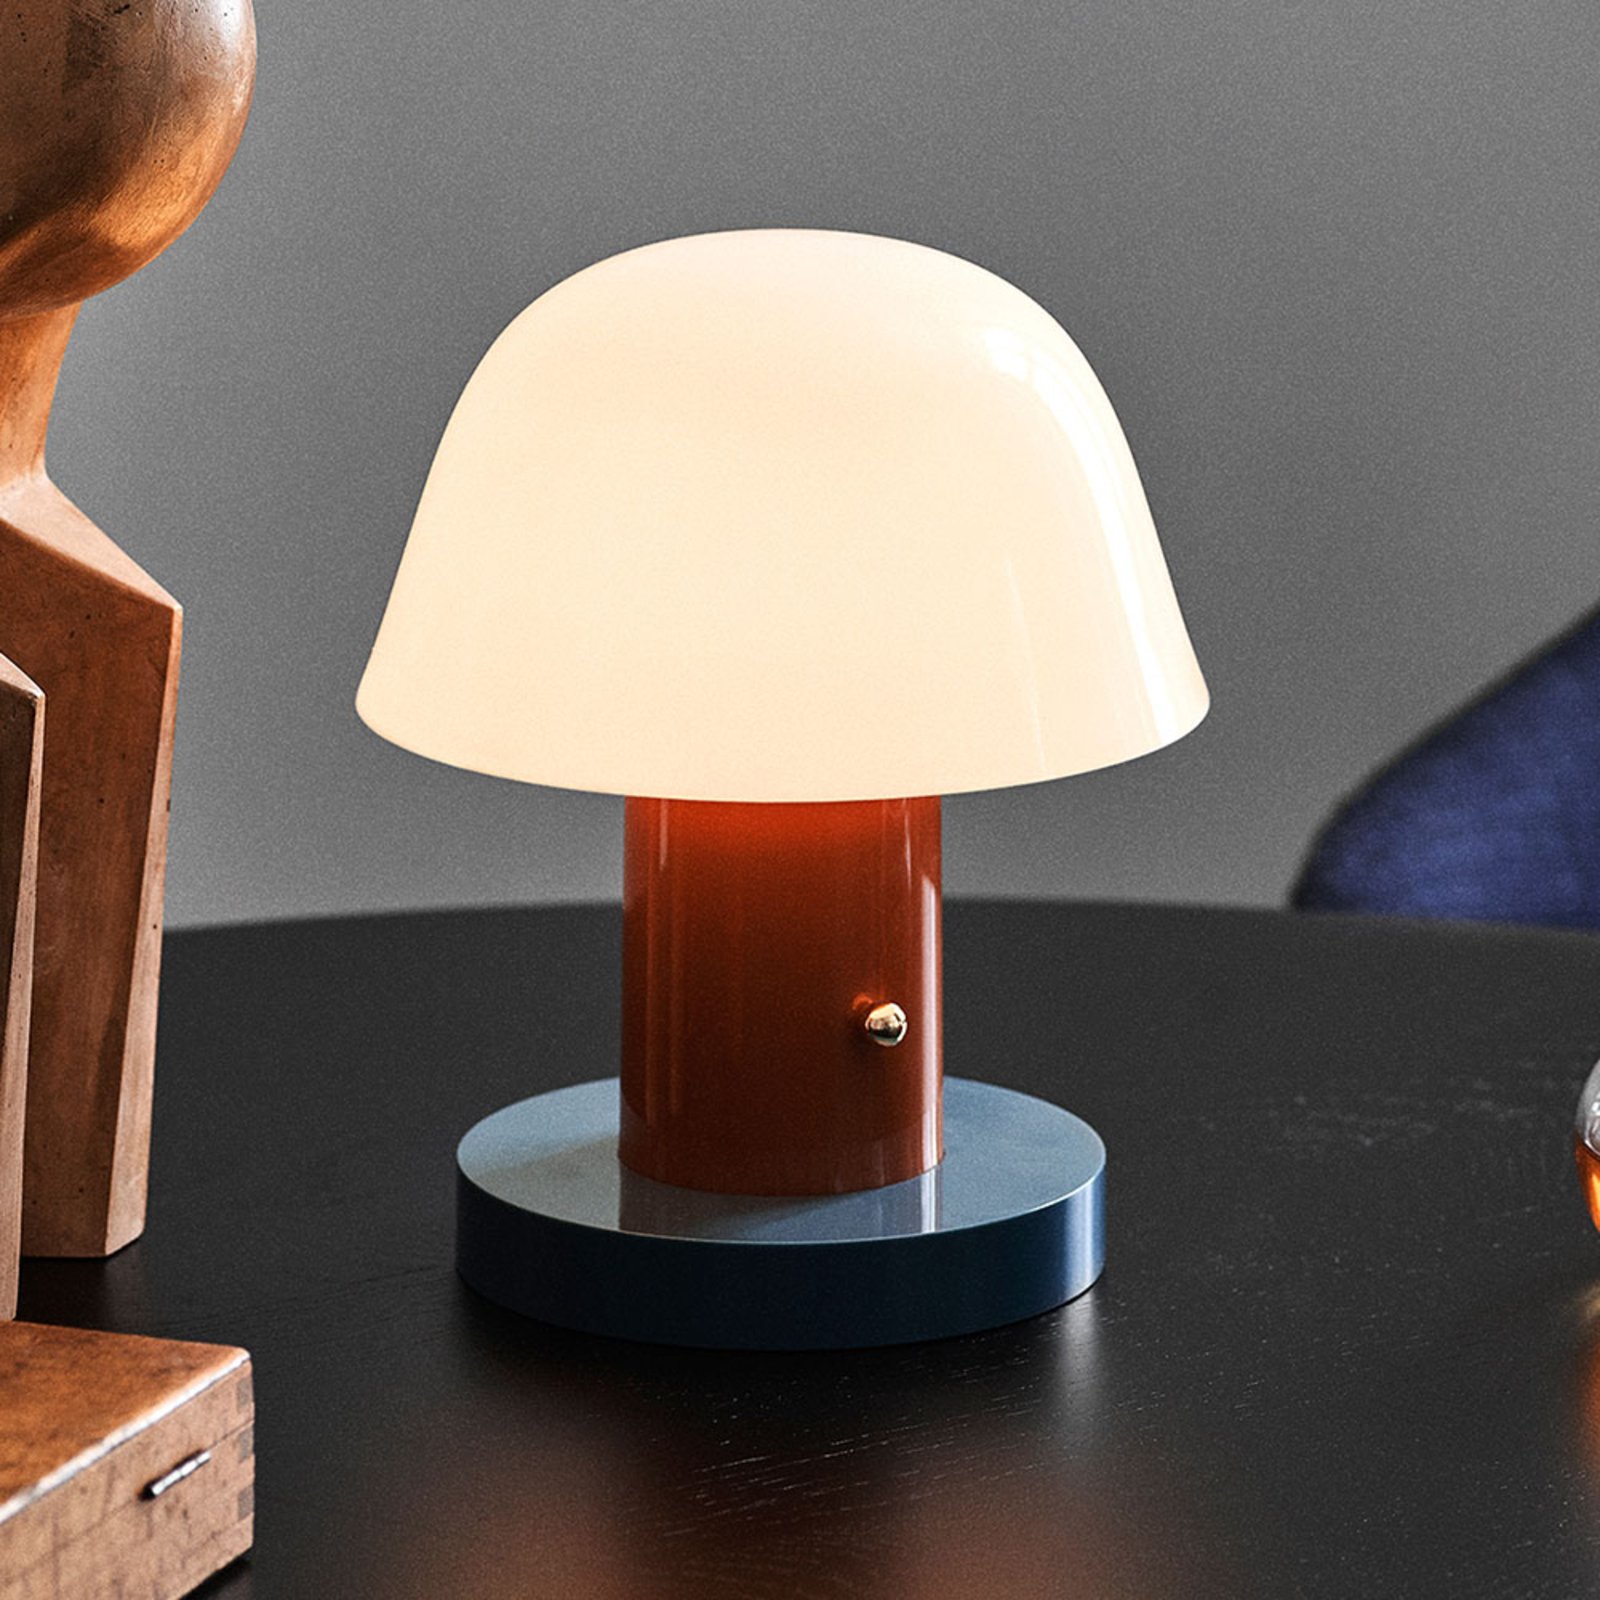 &Tradition Setago JH27 rechargeable table lamp, rust/blue-grey